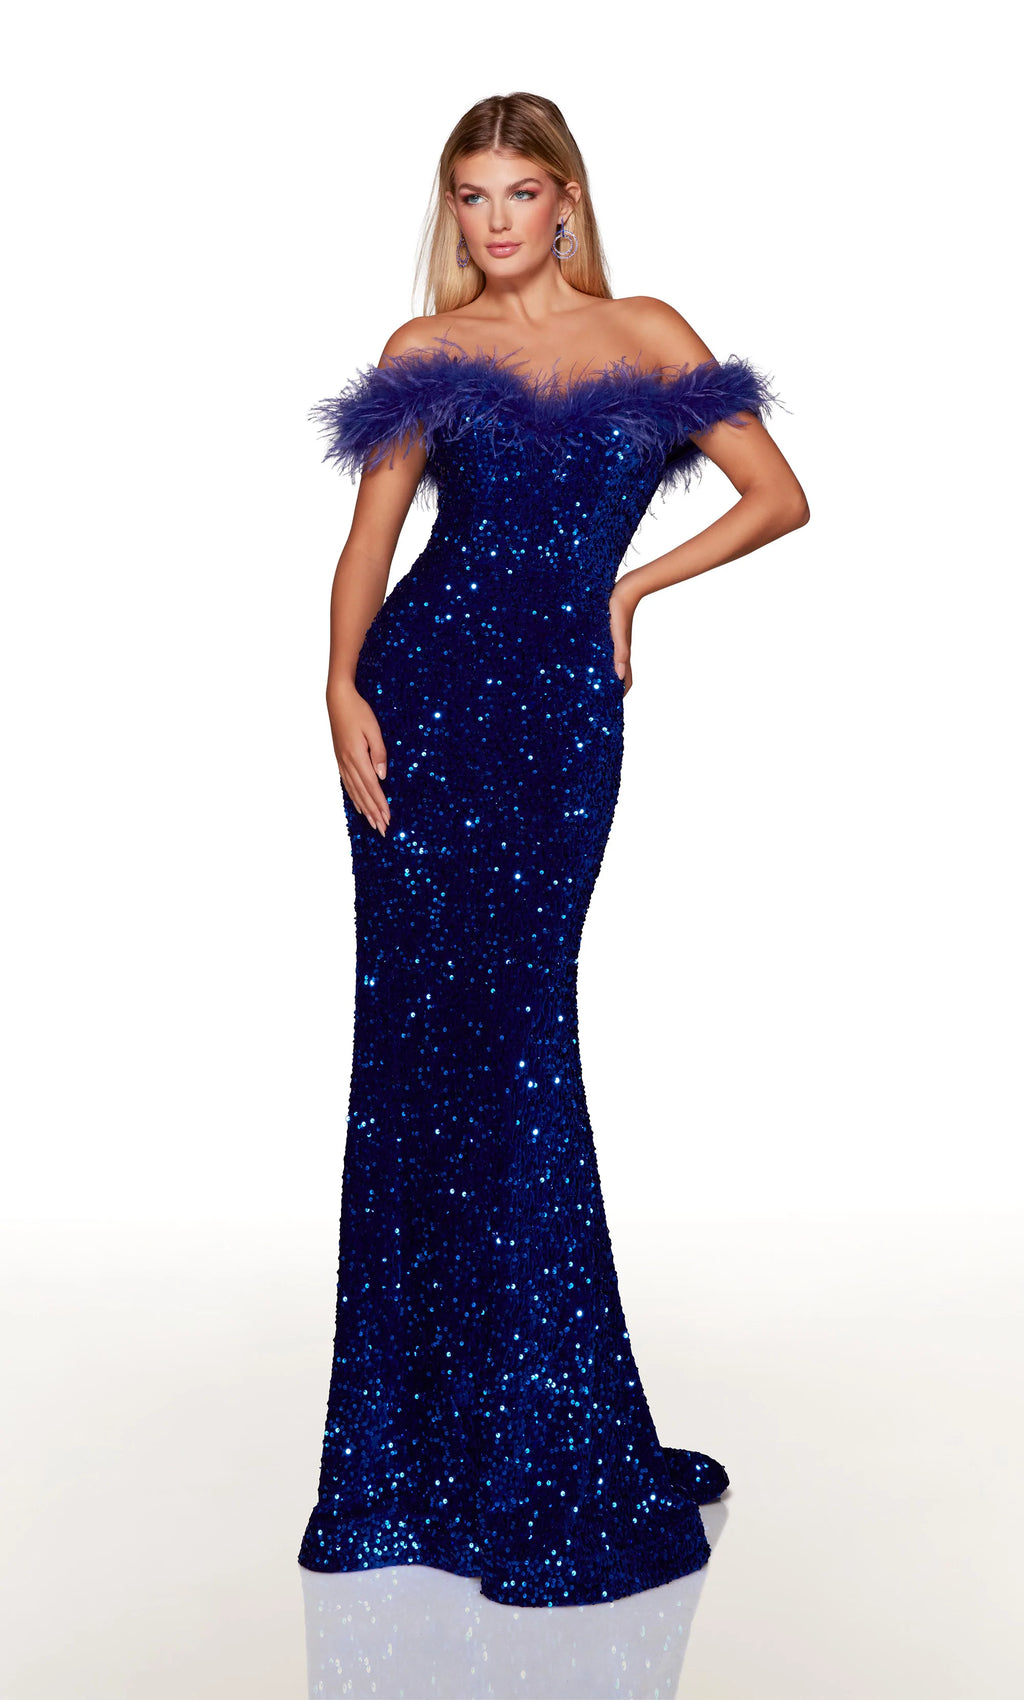 Strike a pose in fabulous style 61379 by Alyce Paris. The off the shoulder sweetheart neckline is complimented by soft feathers that pair perfectly with the fully beaded sequin silhouette that will have you shining effortlessly throughout the night. This dress is completed with a luxurious sweep train.